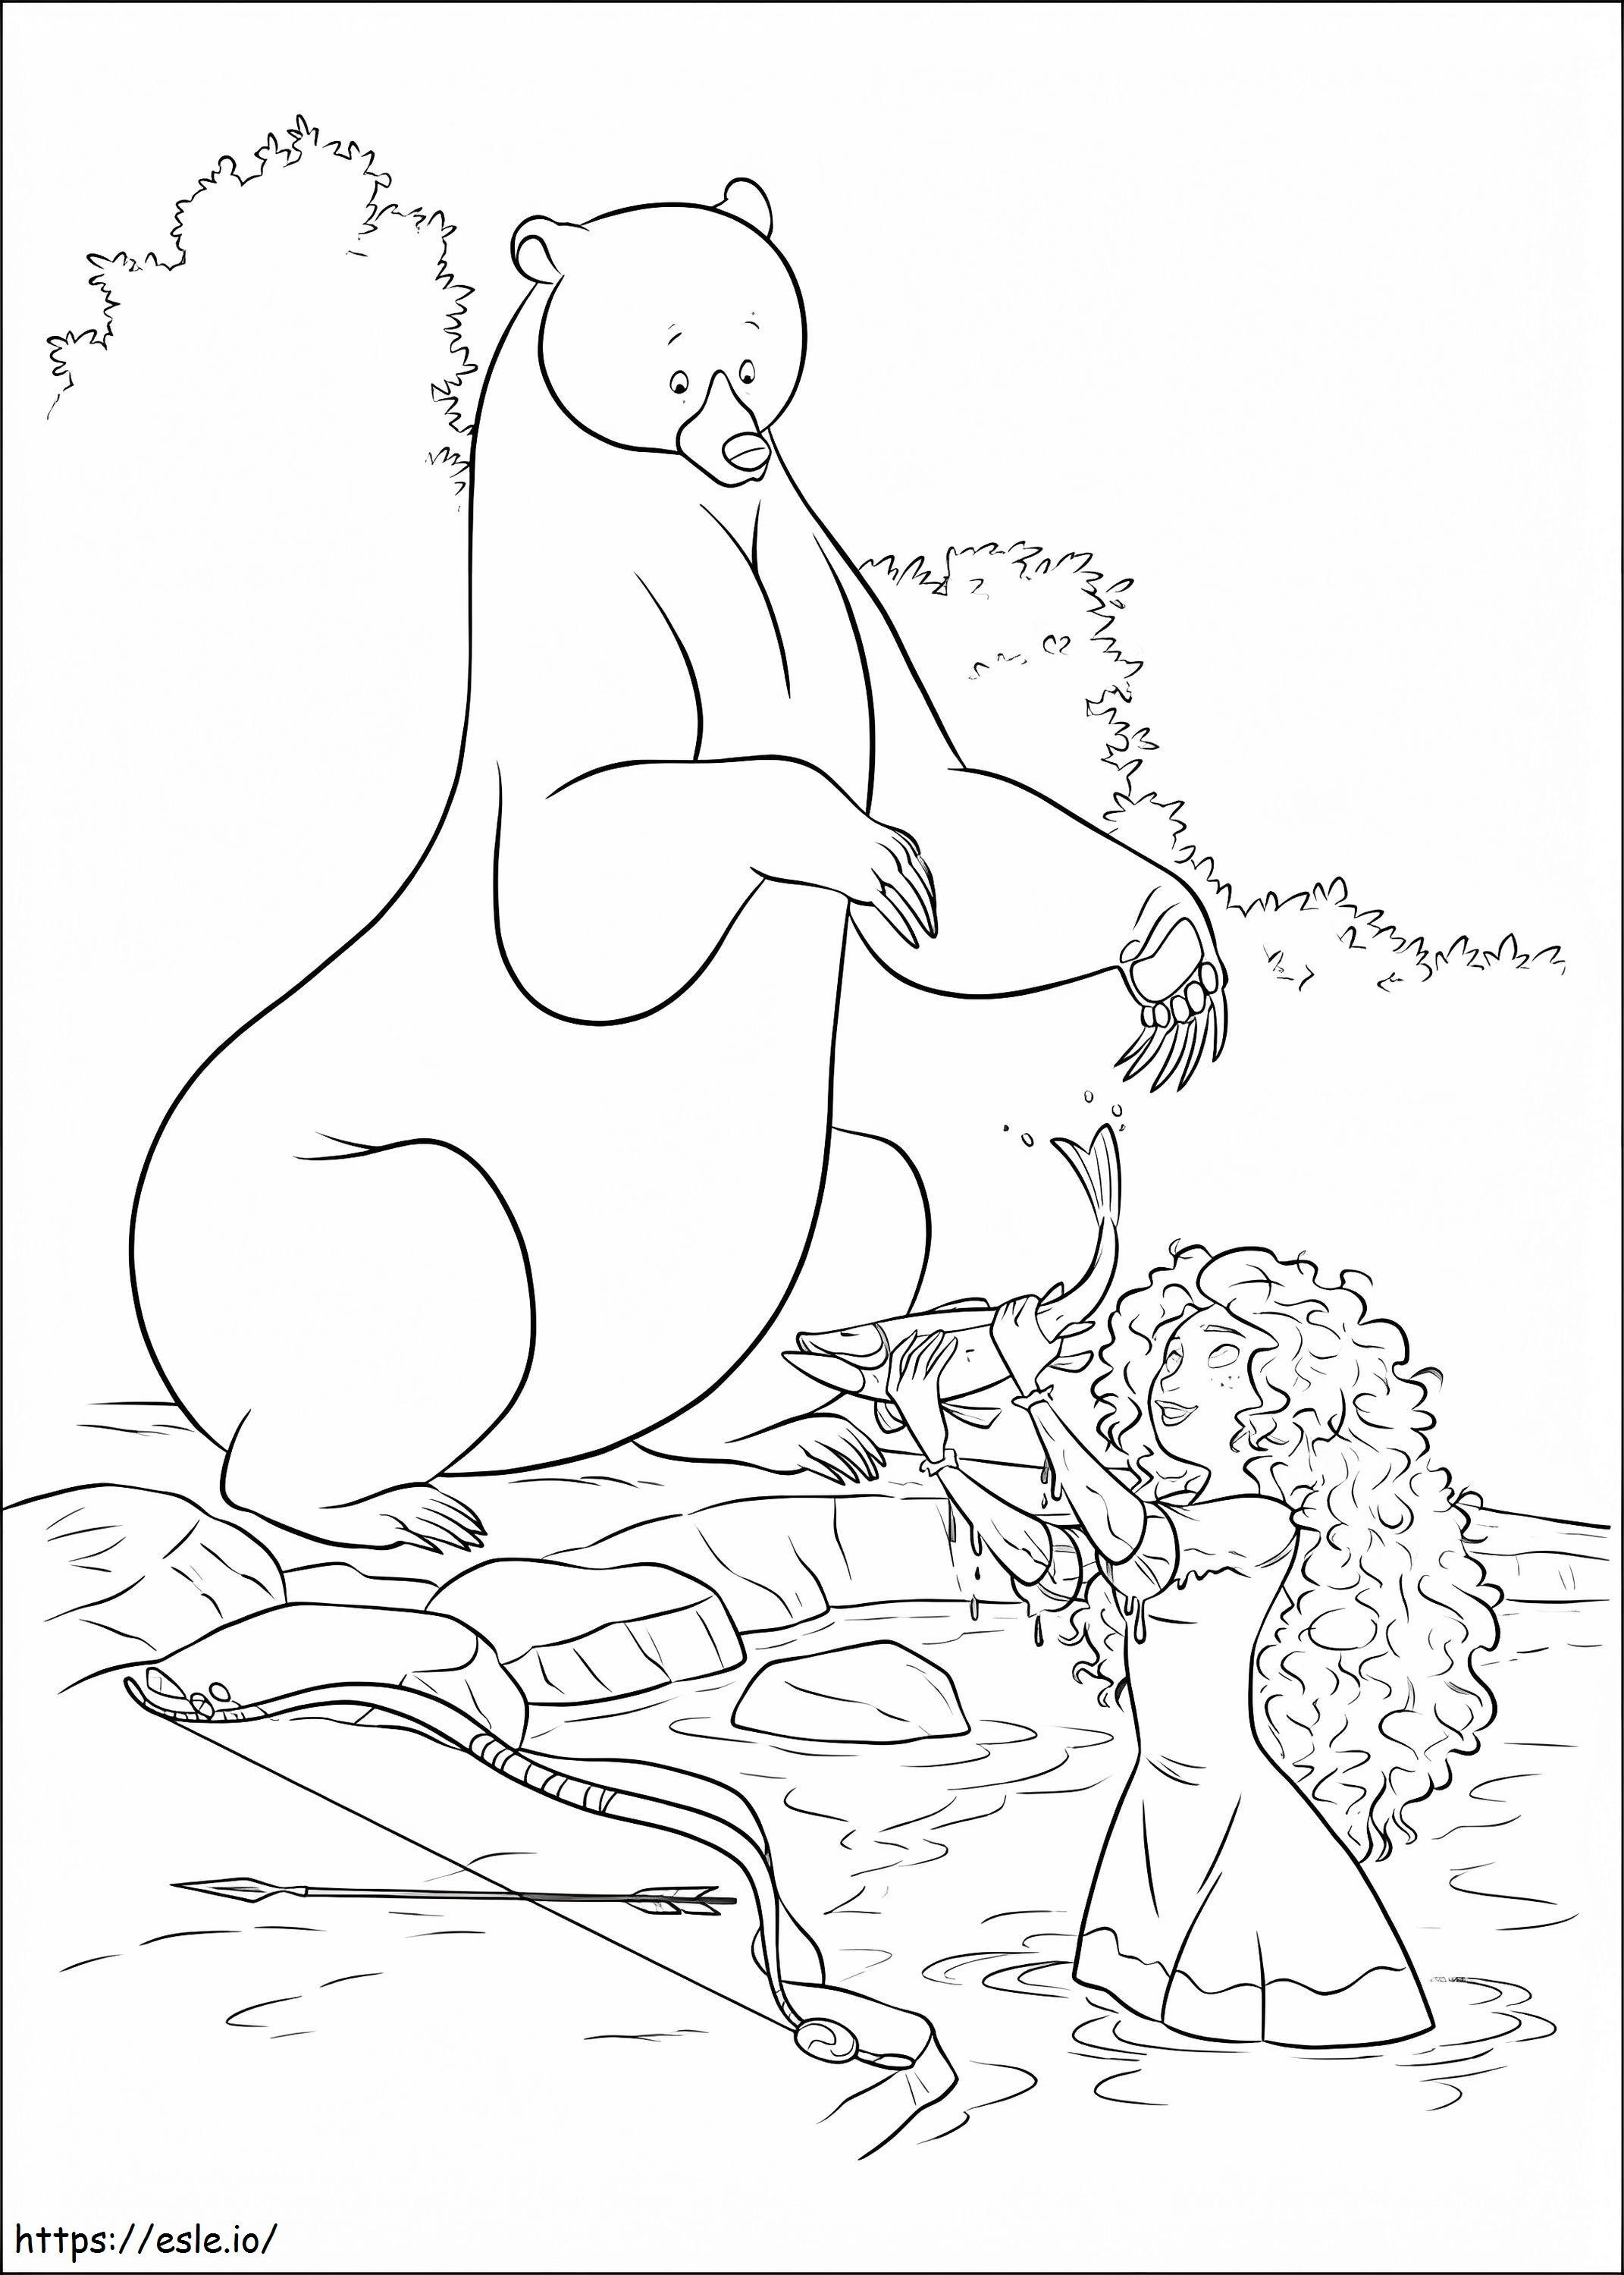 1534213304 Merida Catching Fish A4 coloring page